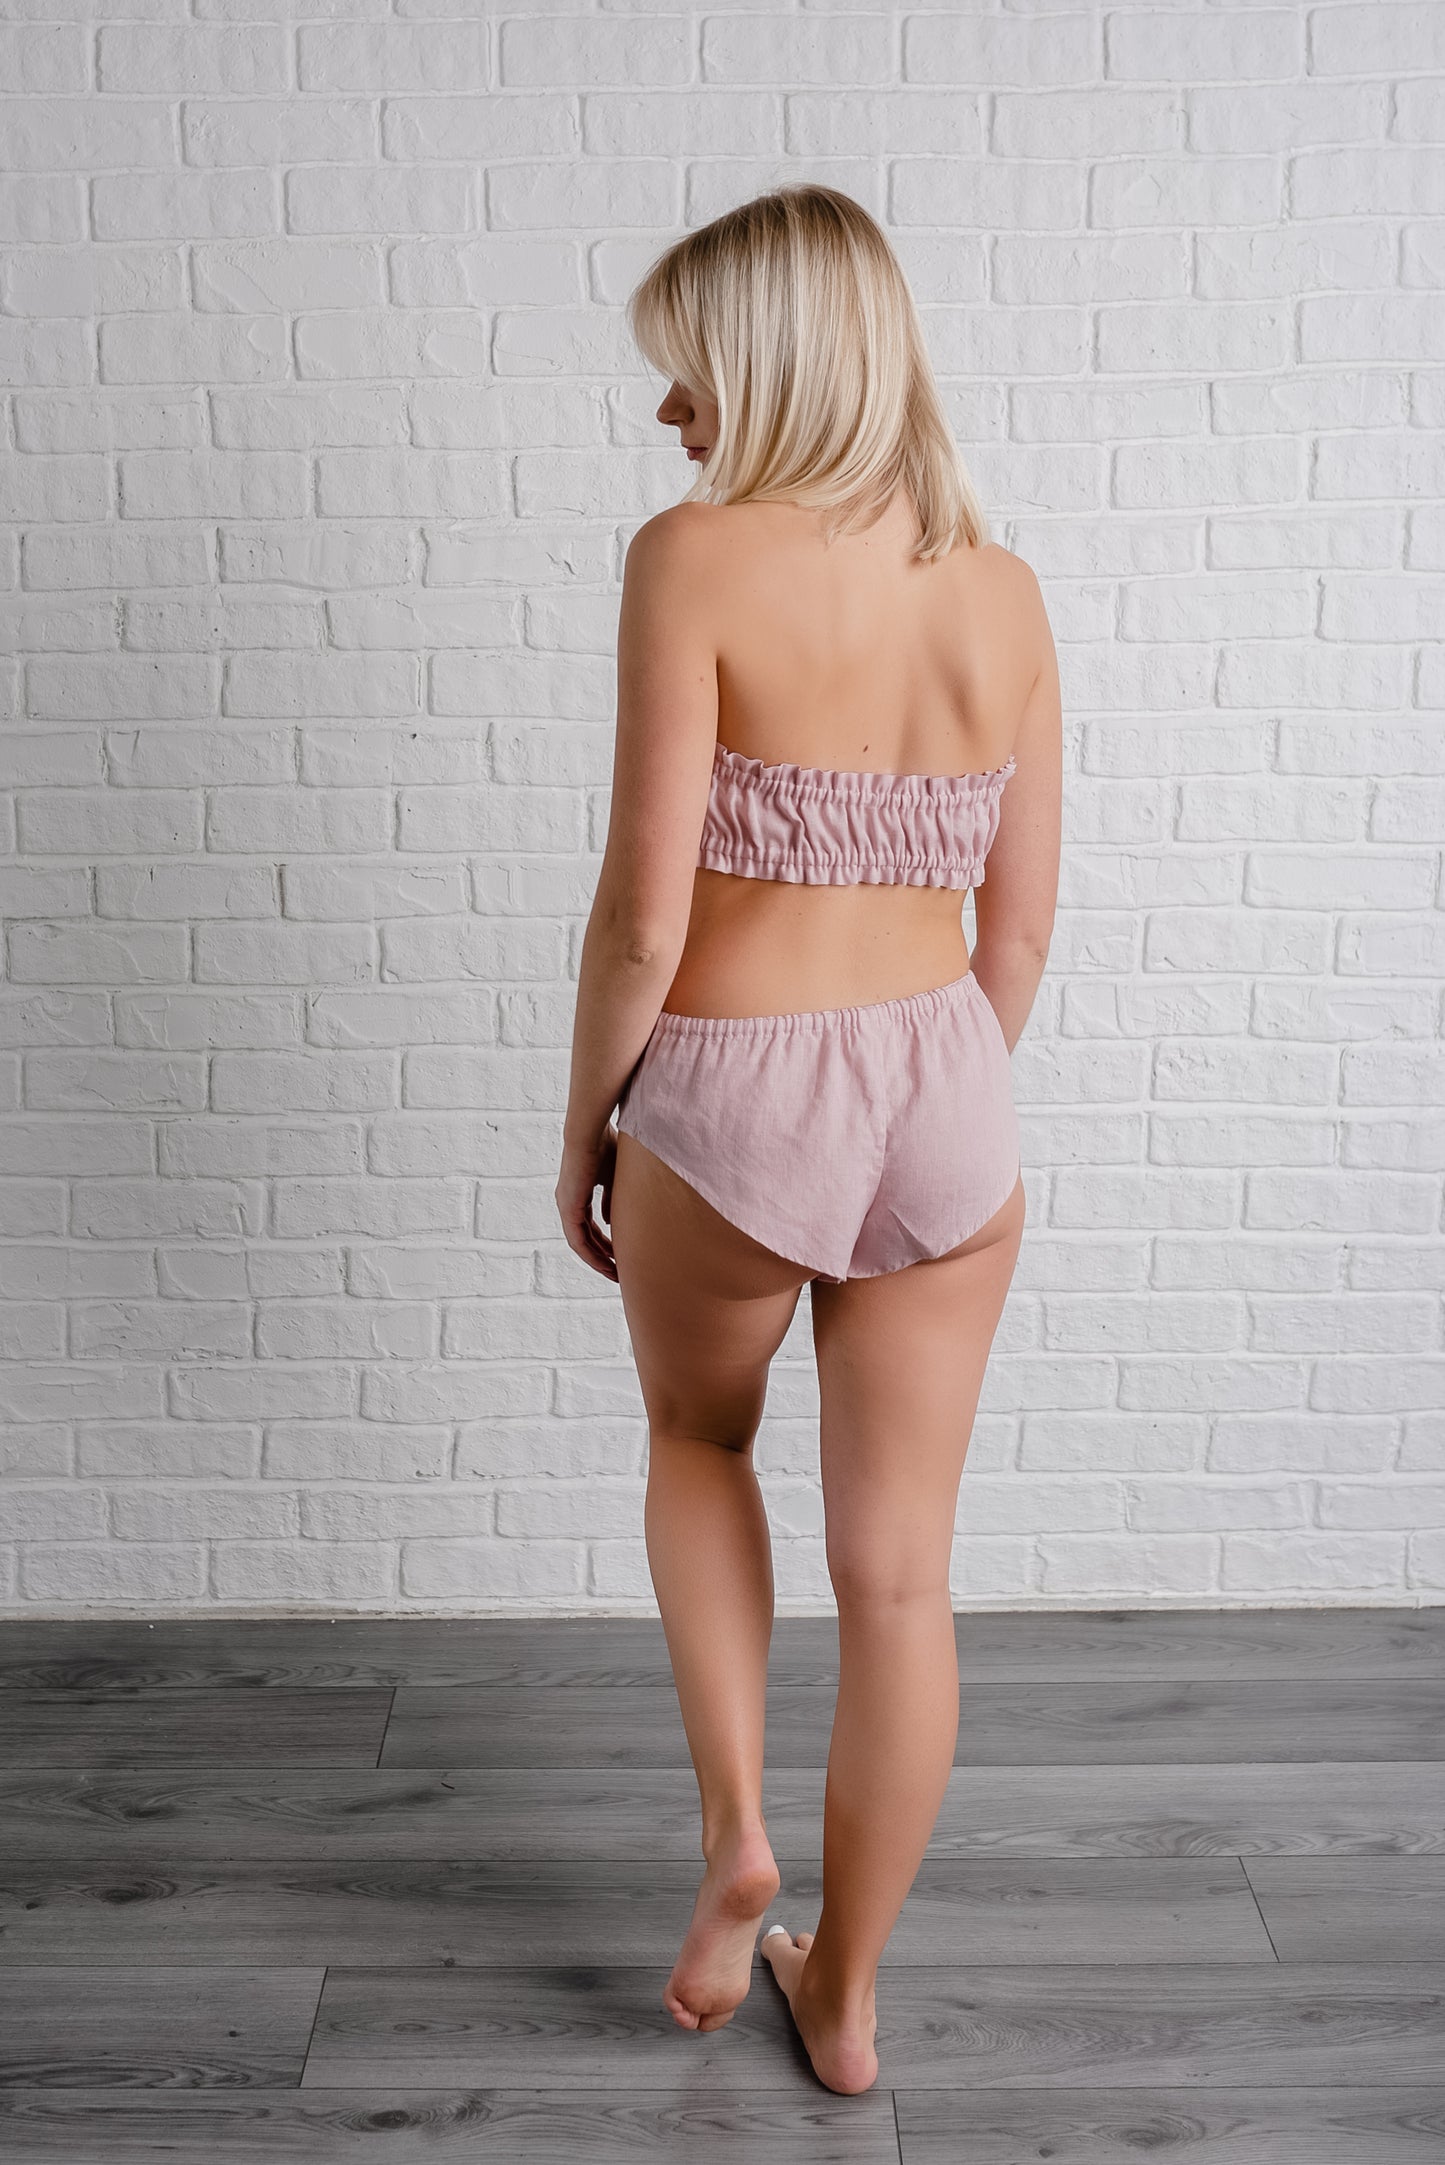 Linen French Knickers/ Luxury Organic Underwear for Her